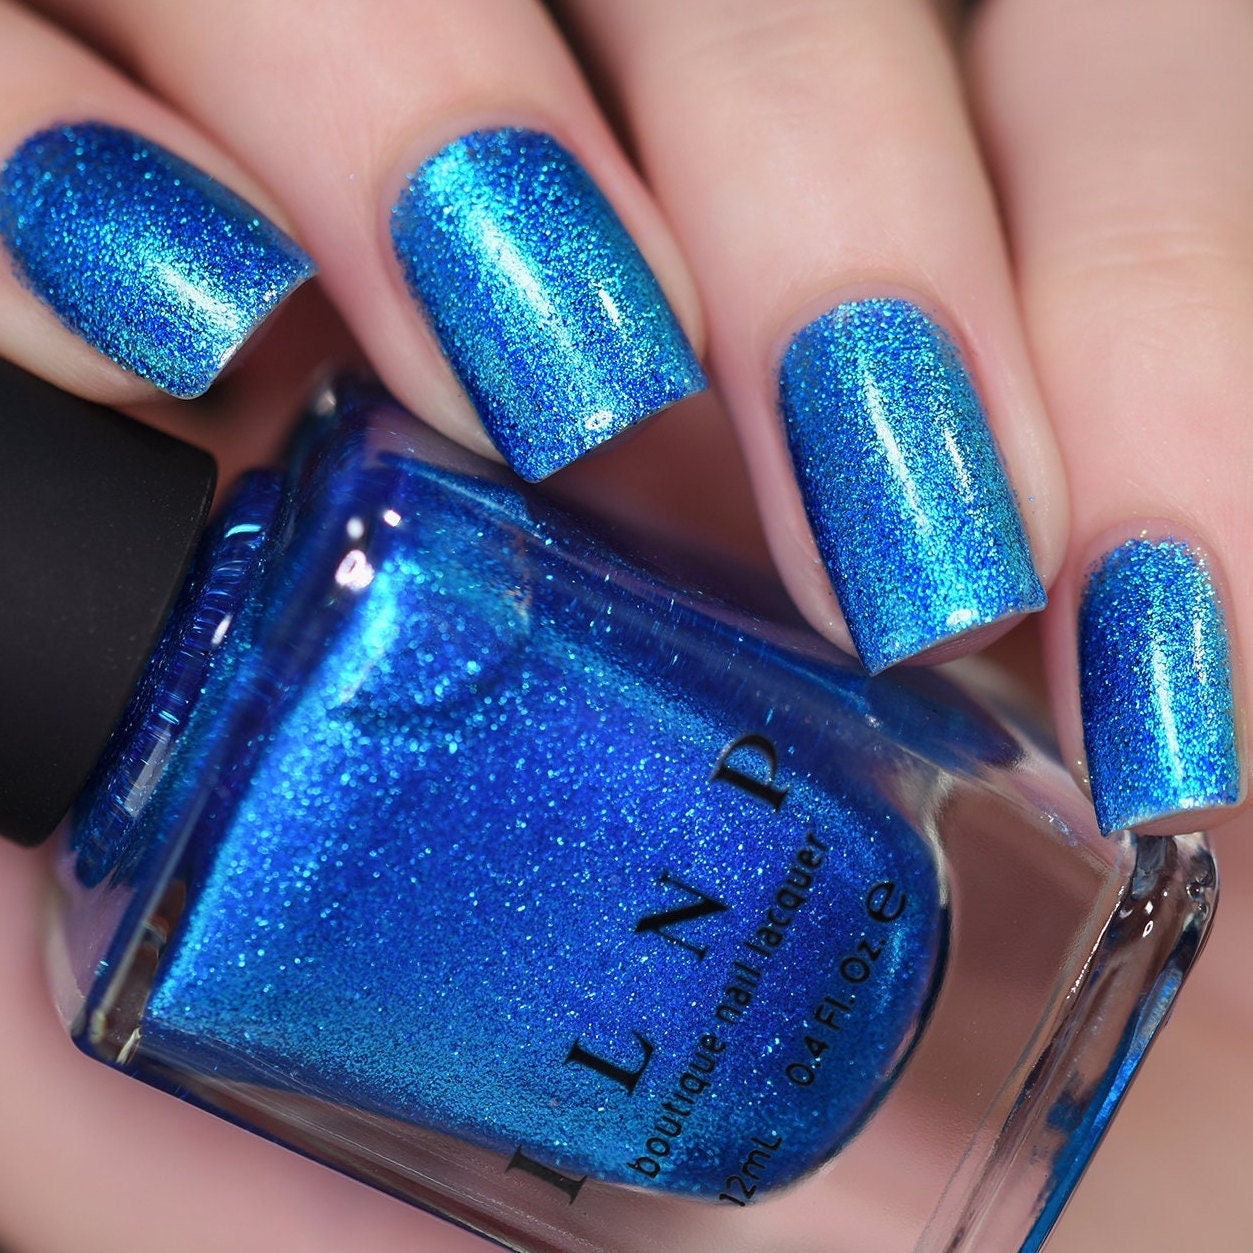 China Glaze China Glaze Nail Lacquer, Crushin' On Blue 0.5 fl oz Live In  Color With Over 300 Nail Colors